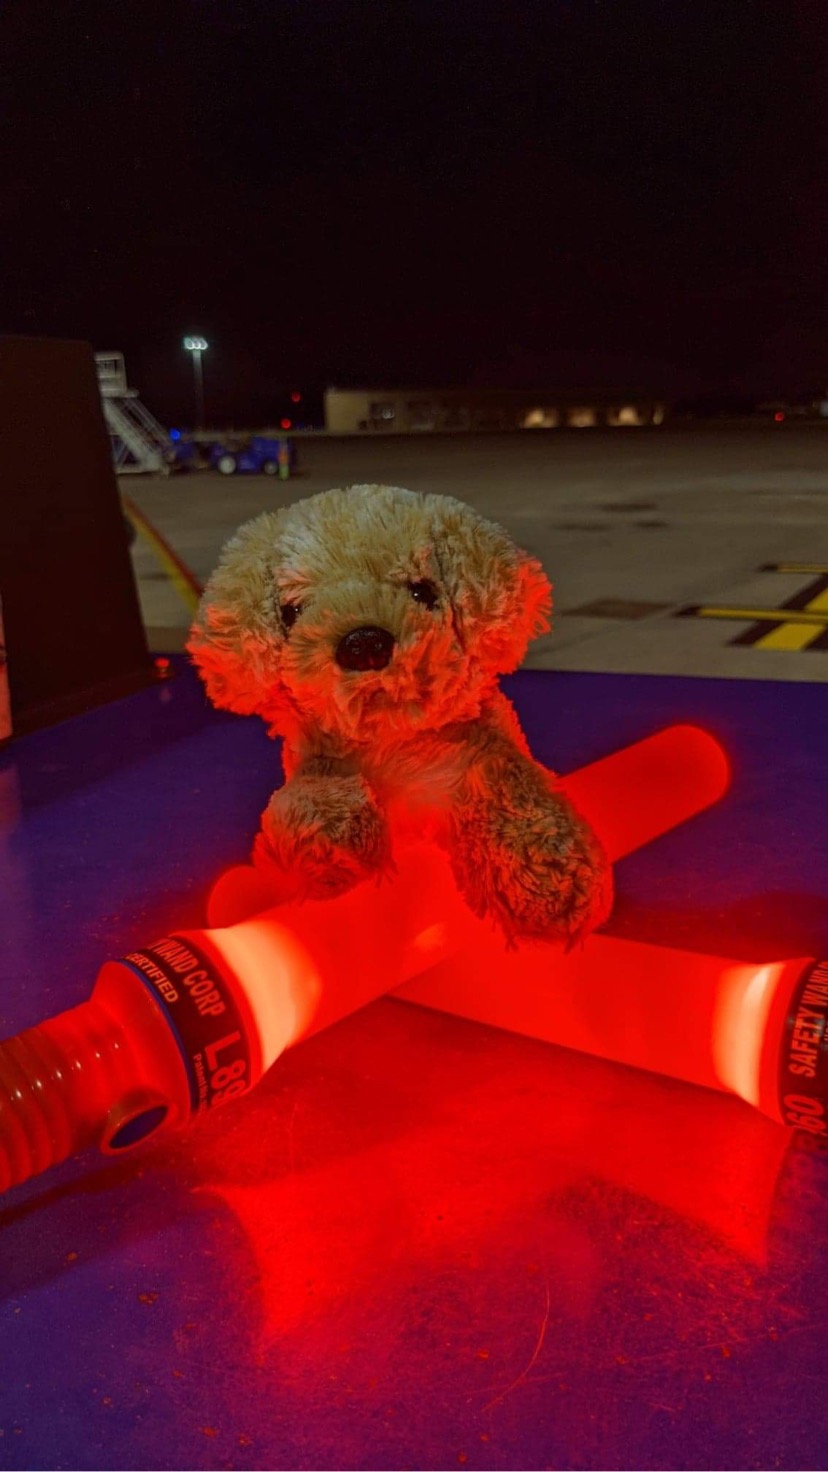 Dog Dog posing with the airport's safety lights that are red.